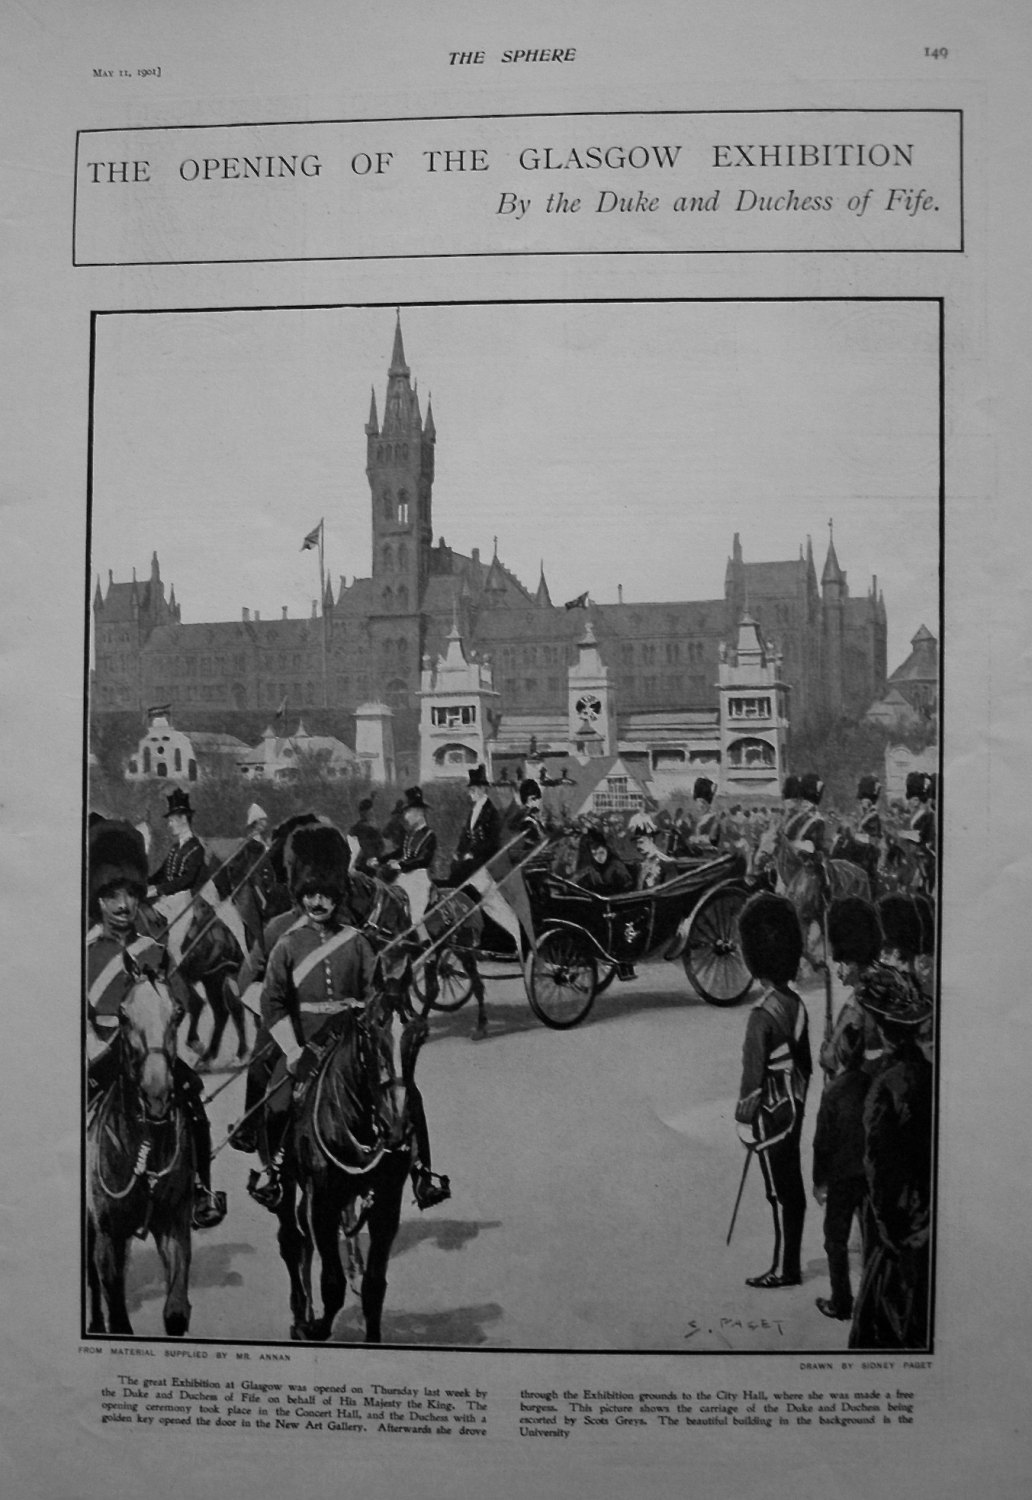 Opening of the Glasgow Exhibition, by the Duke and Duchess of Fife. 1901